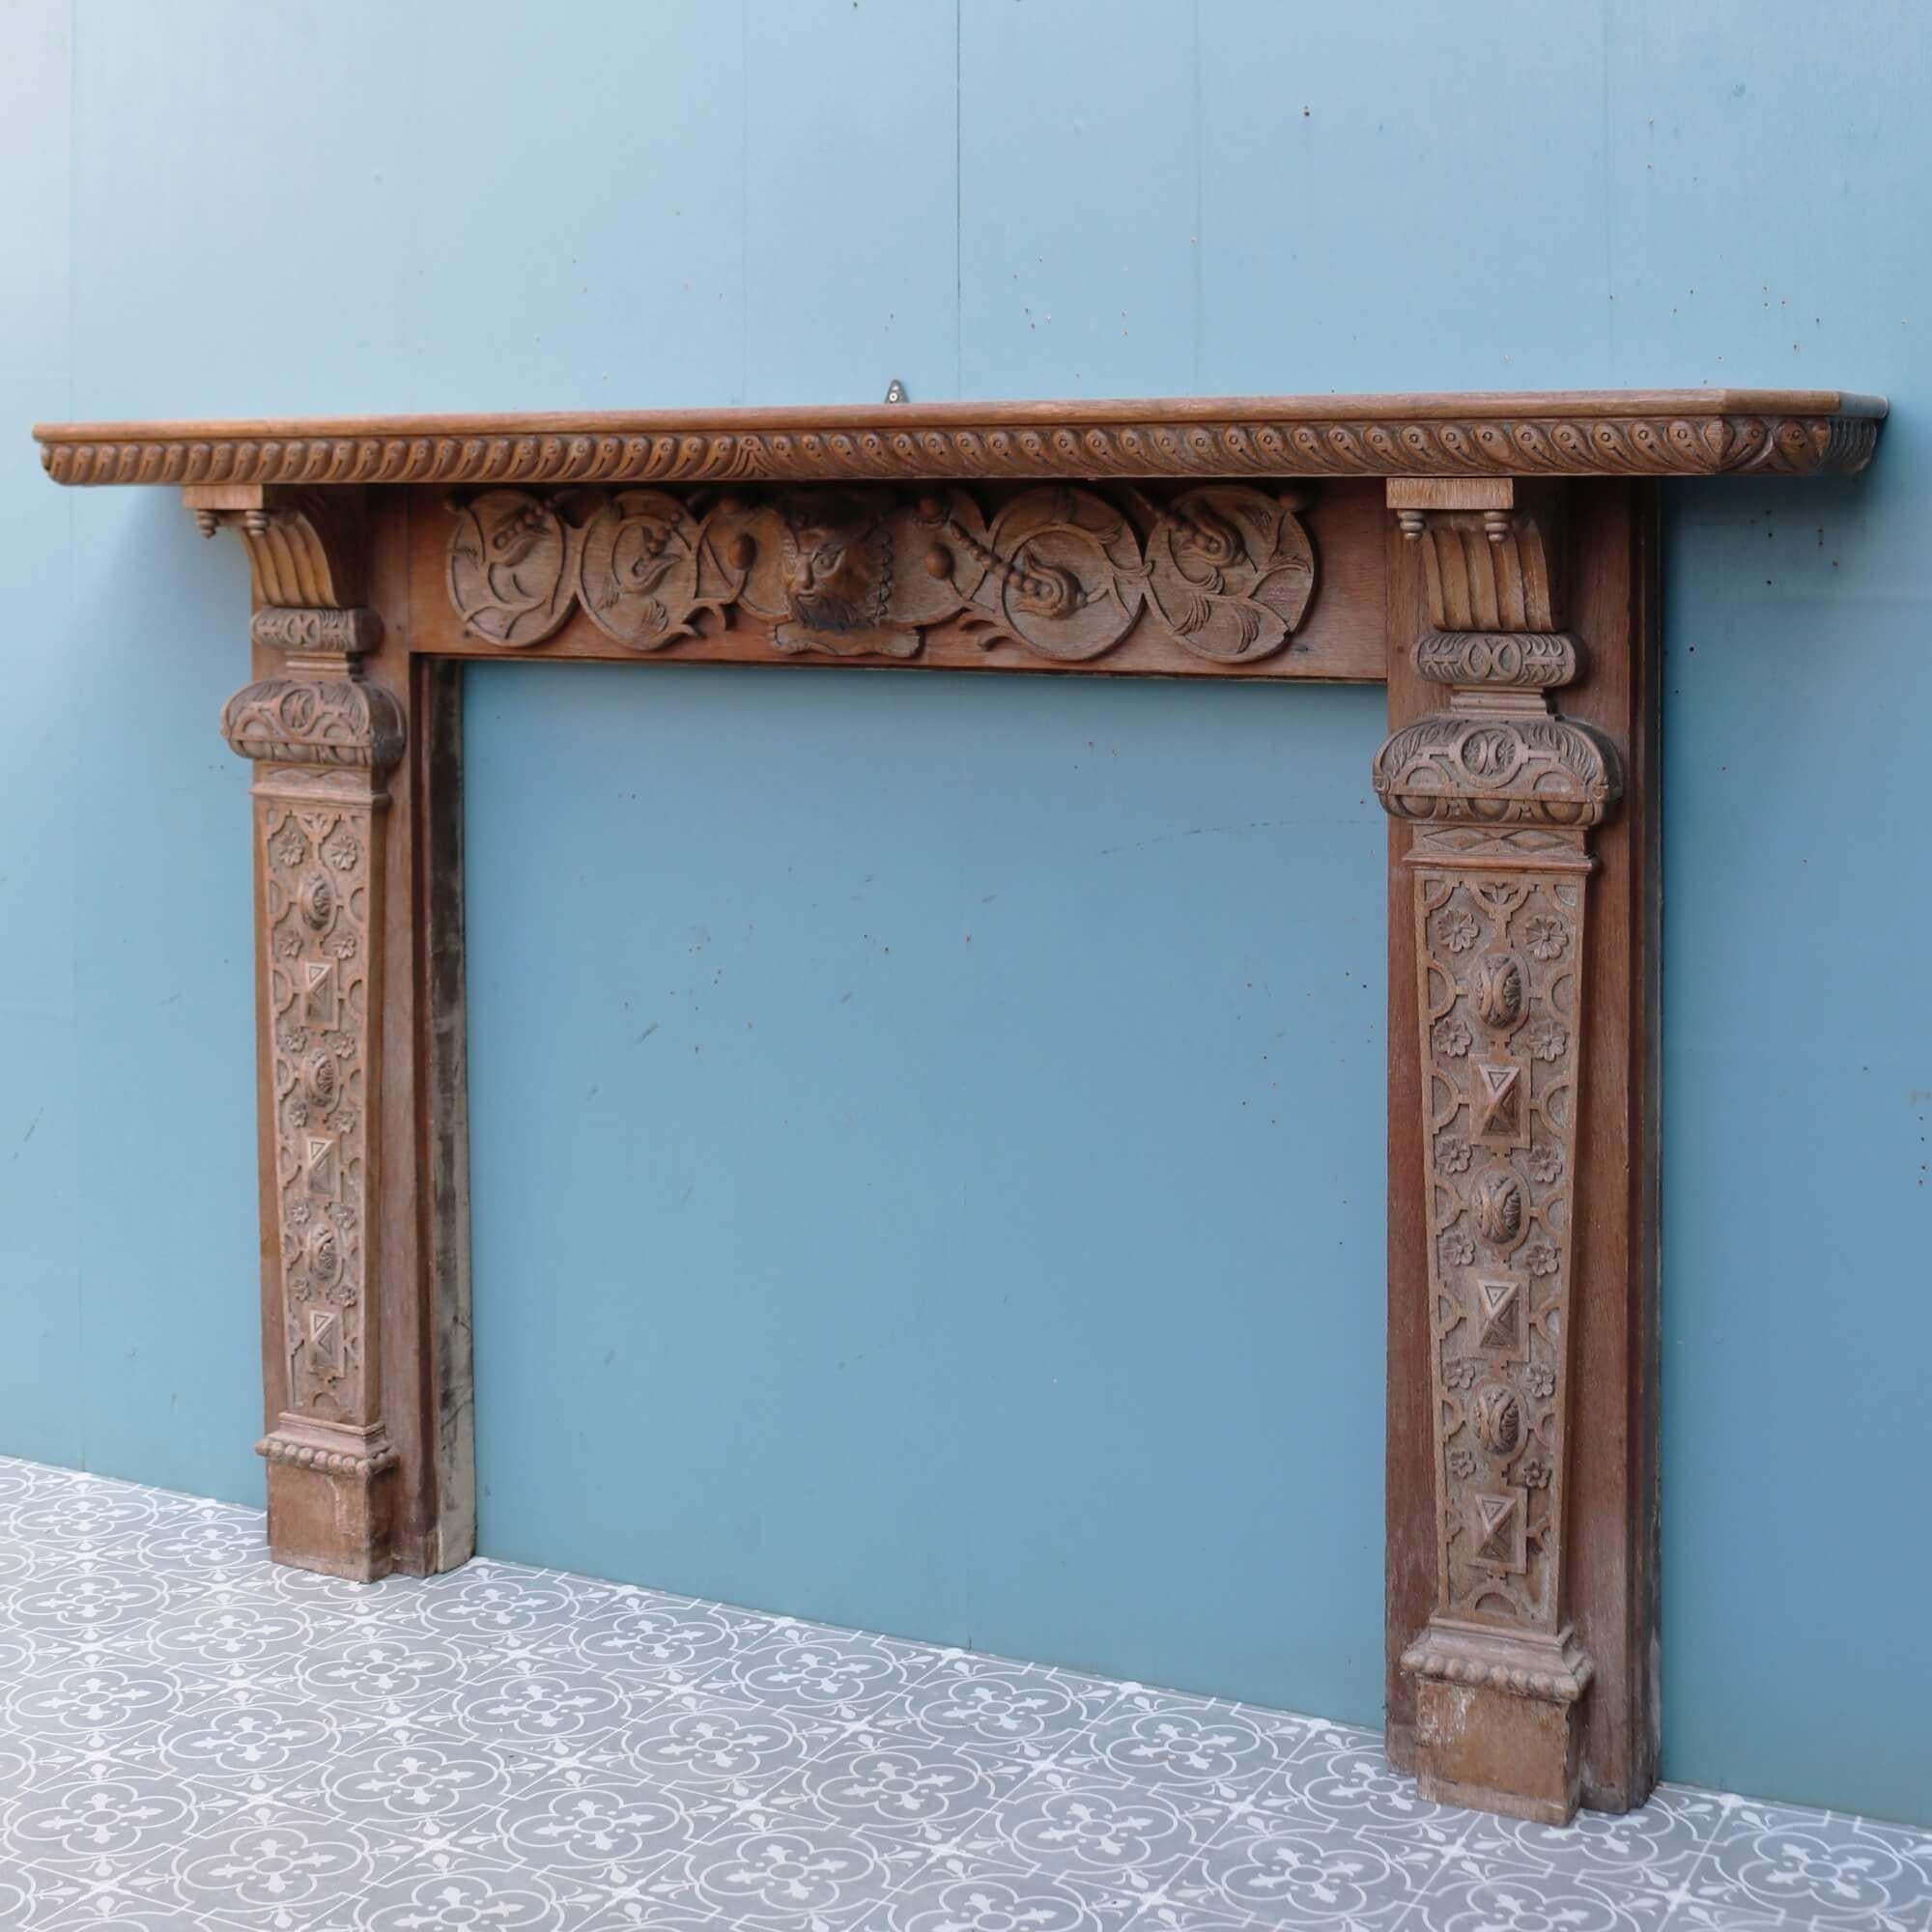 This very large scale carved oak fire mantel is a time-capsule into history. Hand-carved by a talented craftsman at the end of the 19th century, it features a decorative frieze and jambs with an ornate central mask of the Green Man, a legendary